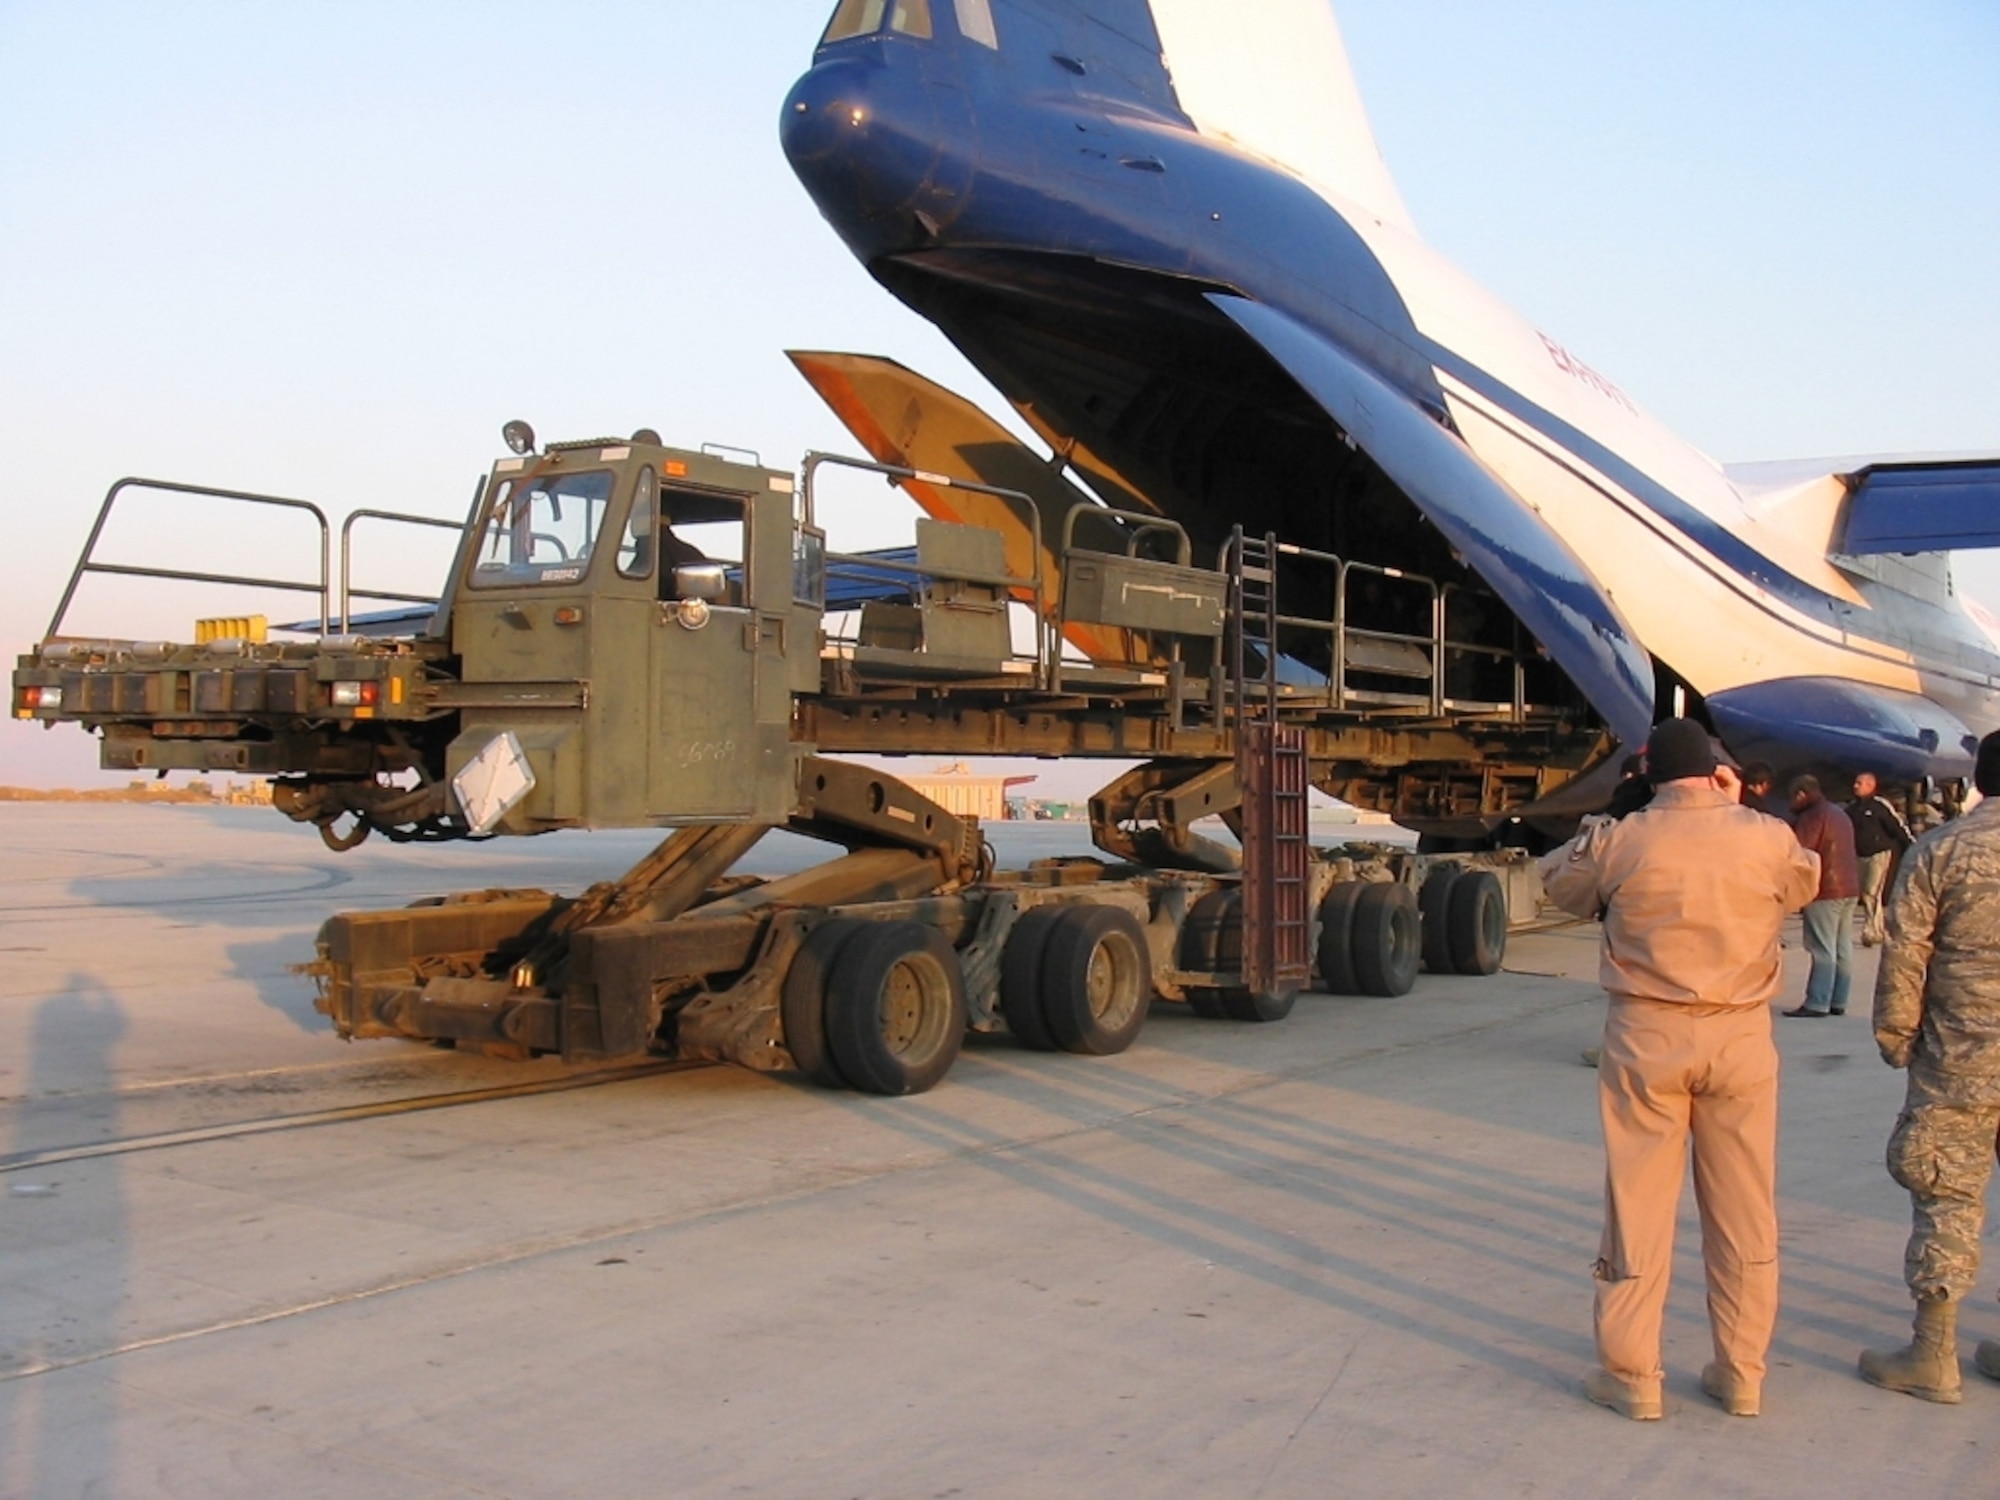 Members of the March Air Reserve Base 56th Aerial Port Squadron, deployed to Bagram Air Base in Afghanistan, use a 60K Aircraft Loader to load a Russian IL-76 aircraft. (U.S. Air Force photo)